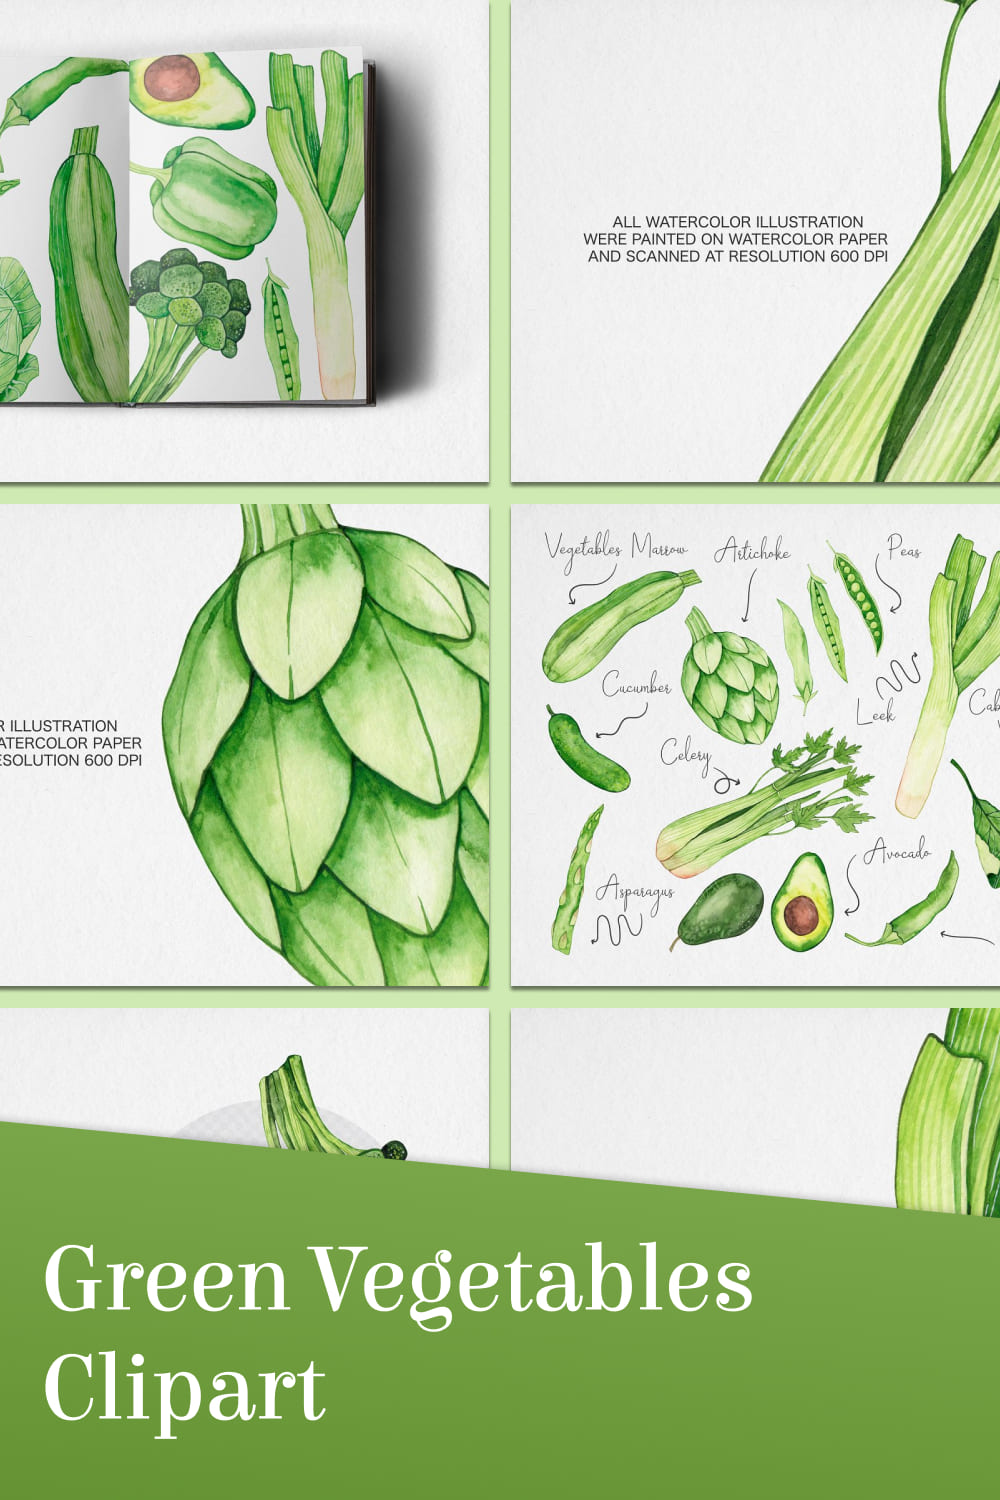 Watercolor green vegetables clipart - pinterest image preview.